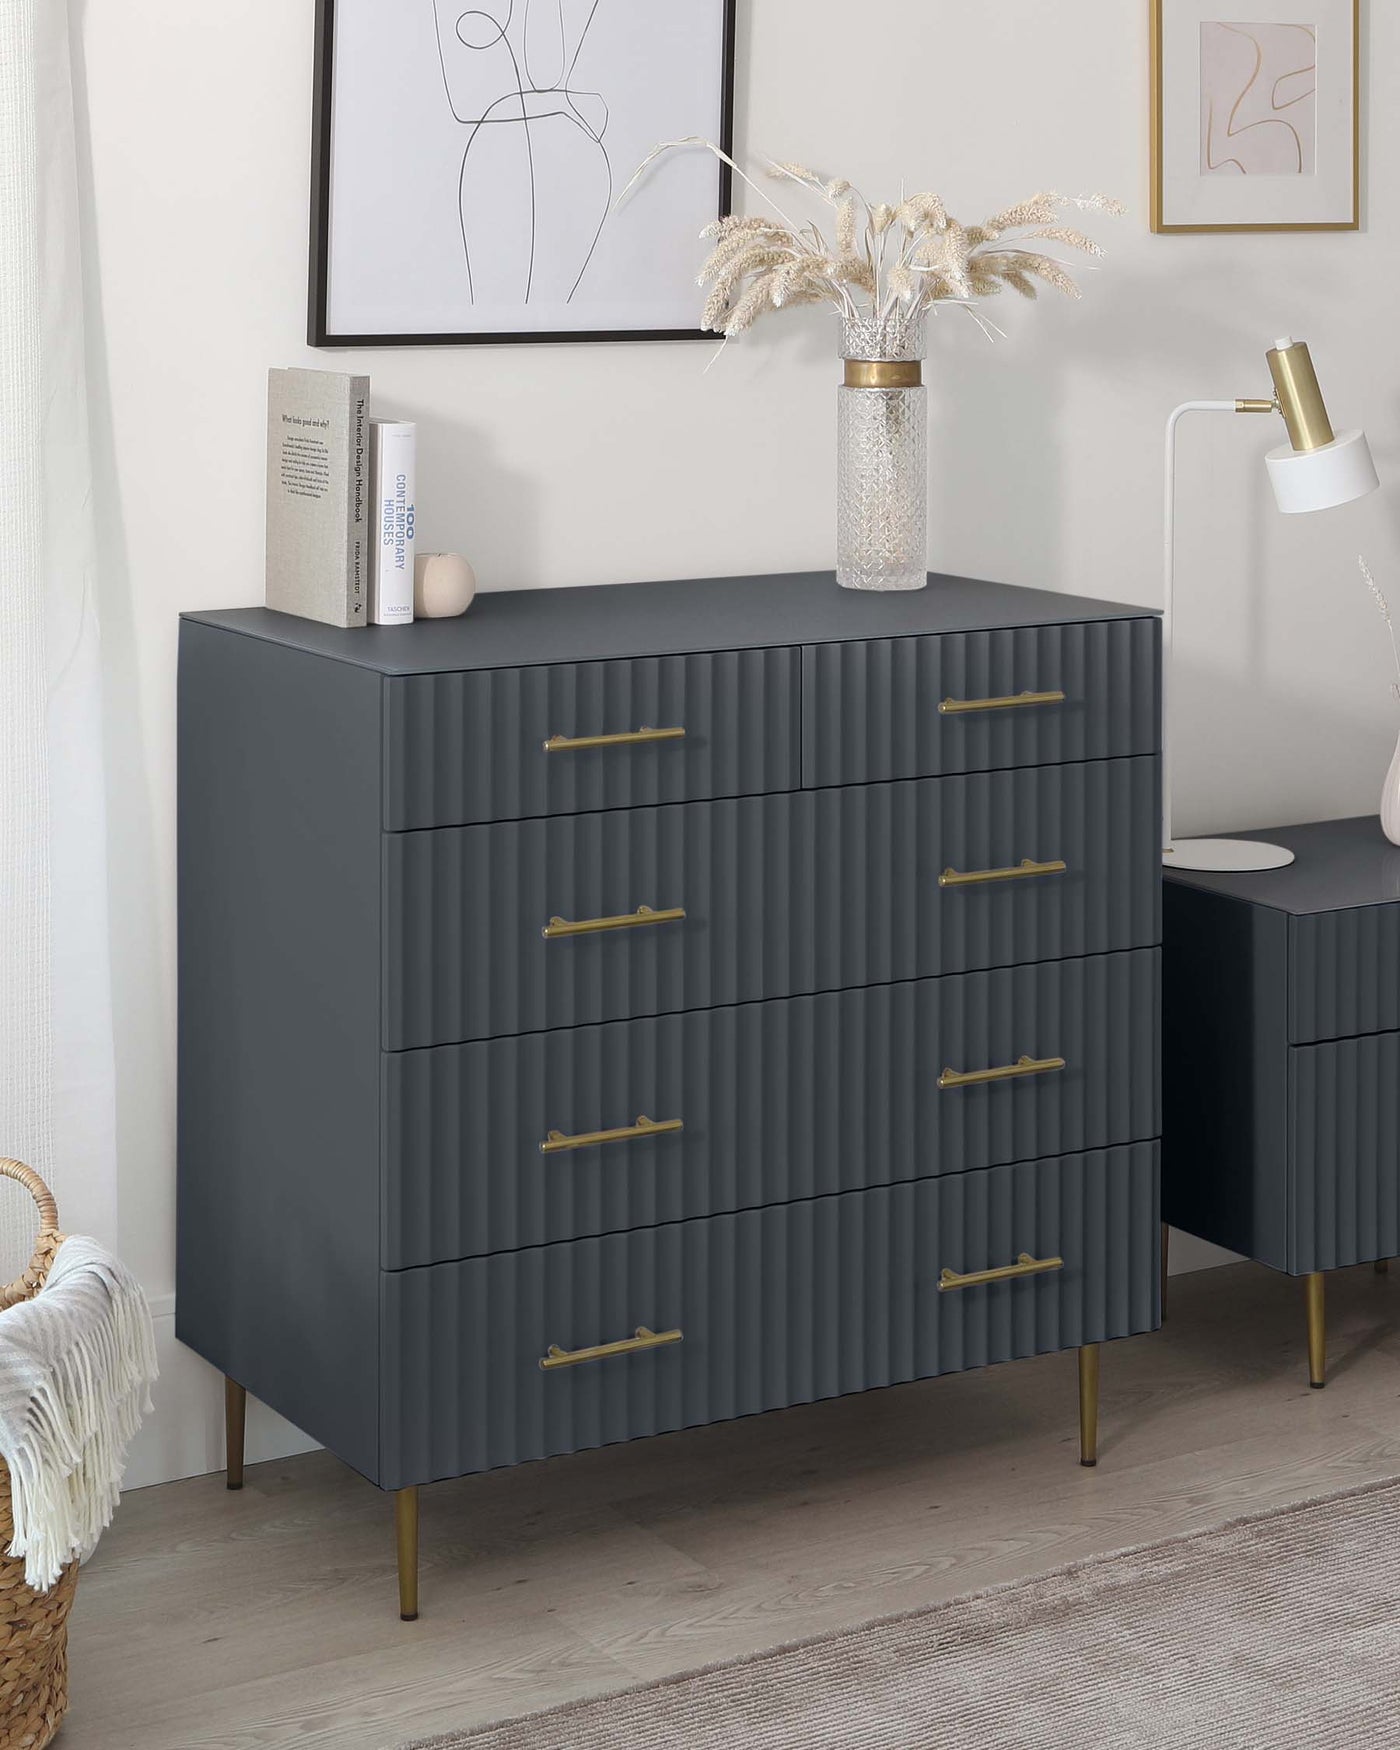 Modern matte grey six-drawer dresser with textured front panels and brass handles on tapered legs, accompanied by a matching desk with a white lamp, positioned against a white wall decorated with framed abstract art, next to a pampas grass vase and books.